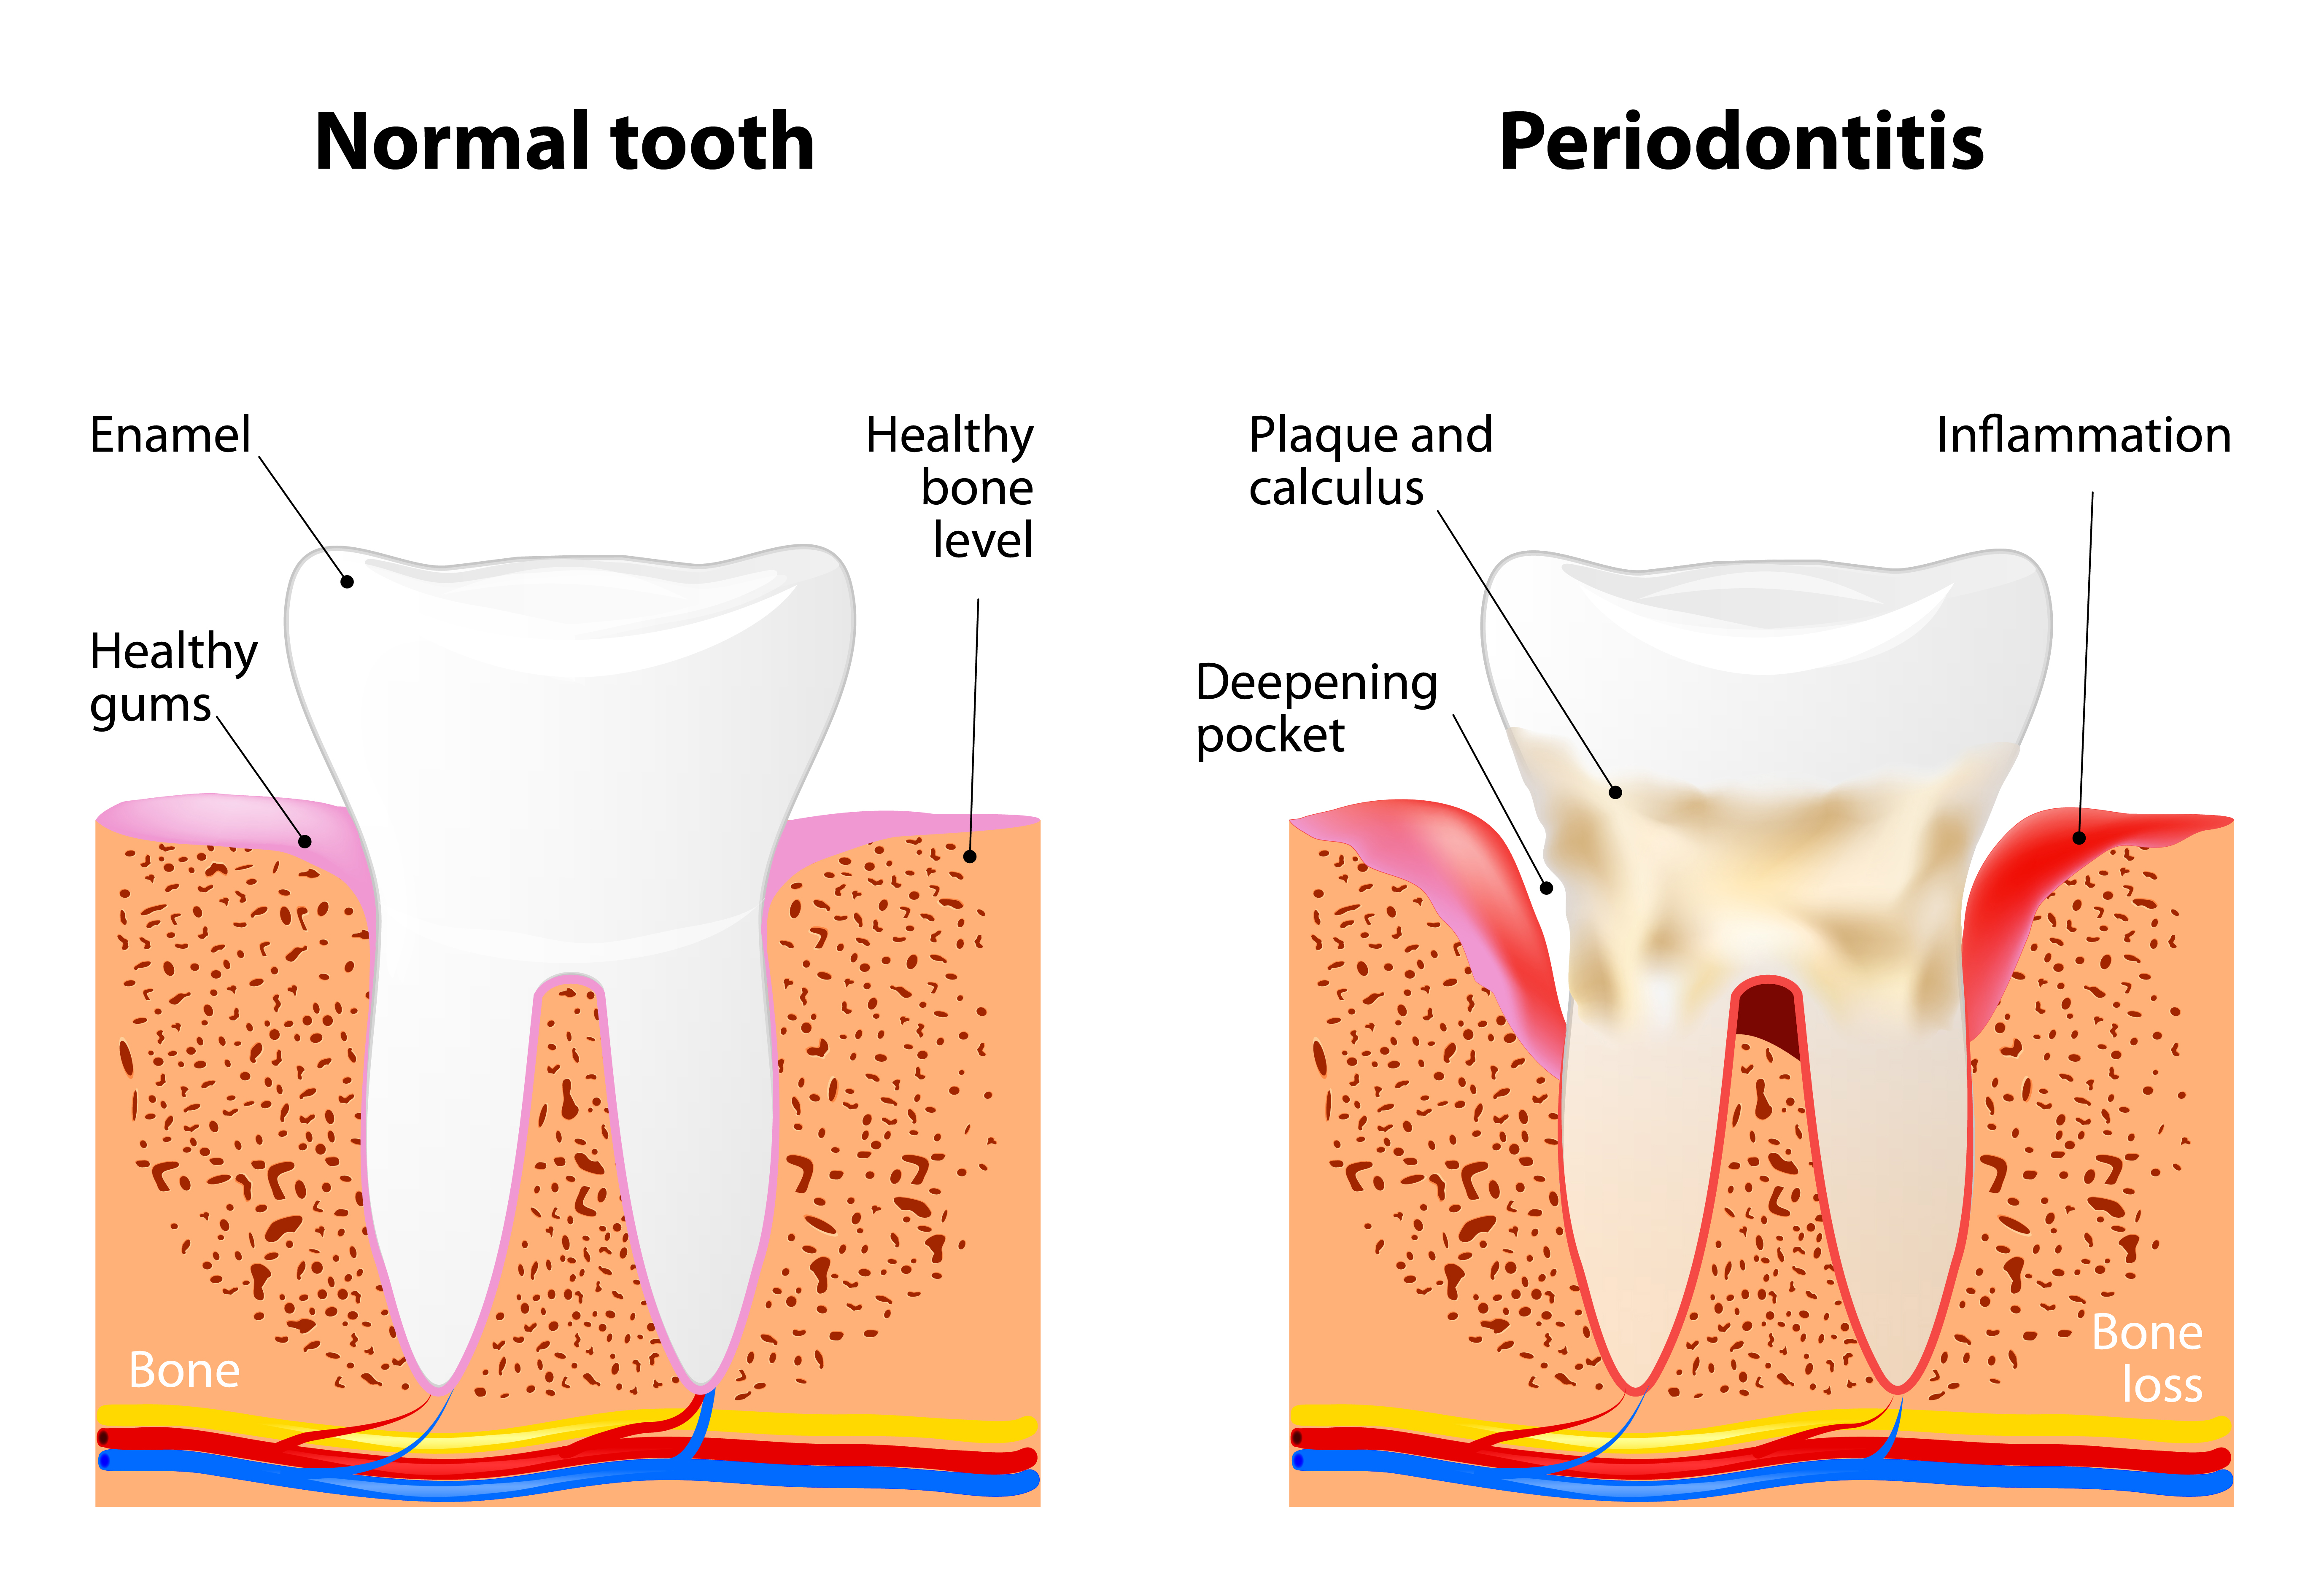 Periodontitis is a inflammatory diseases affecting the periodontium, the tissues that surround and support the teeth